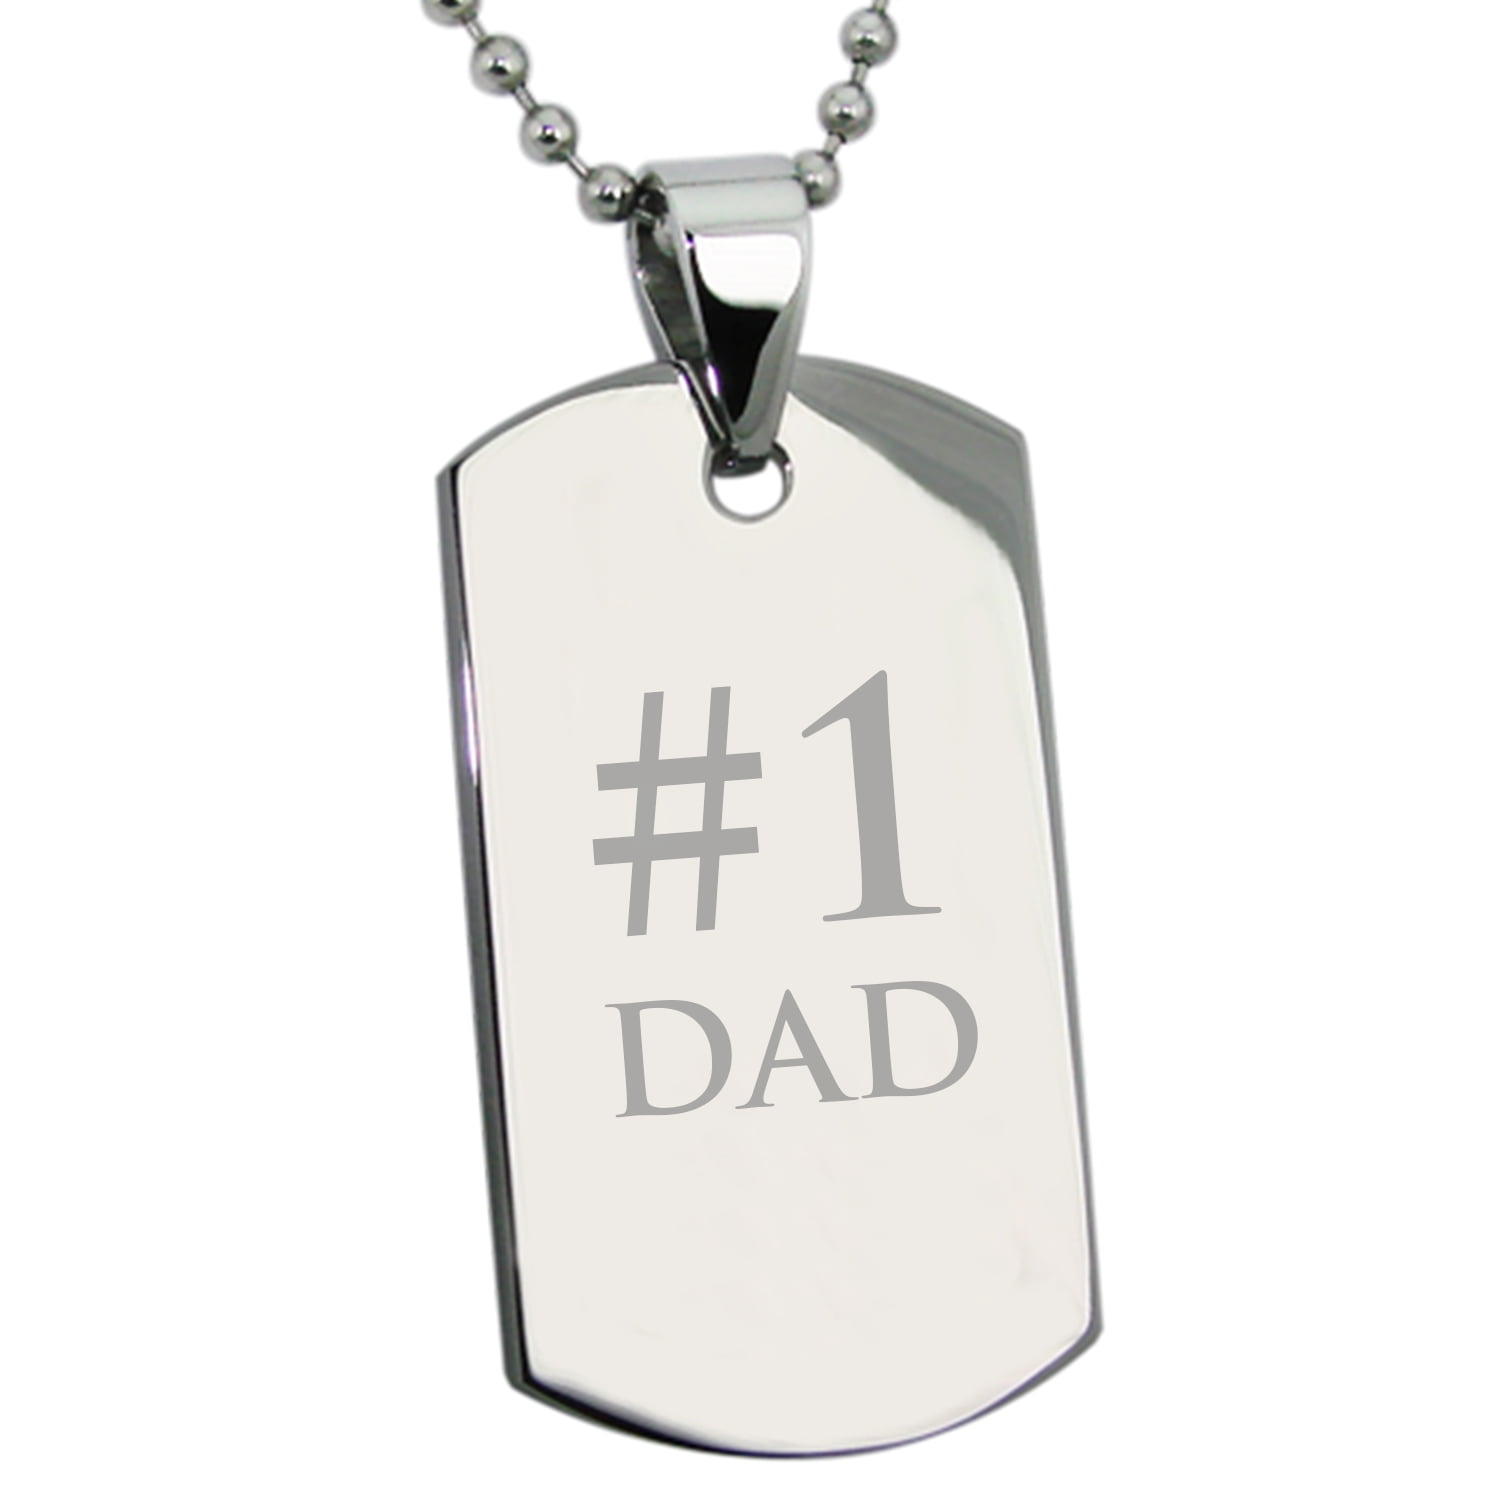 Mens Personalized Dog Tags